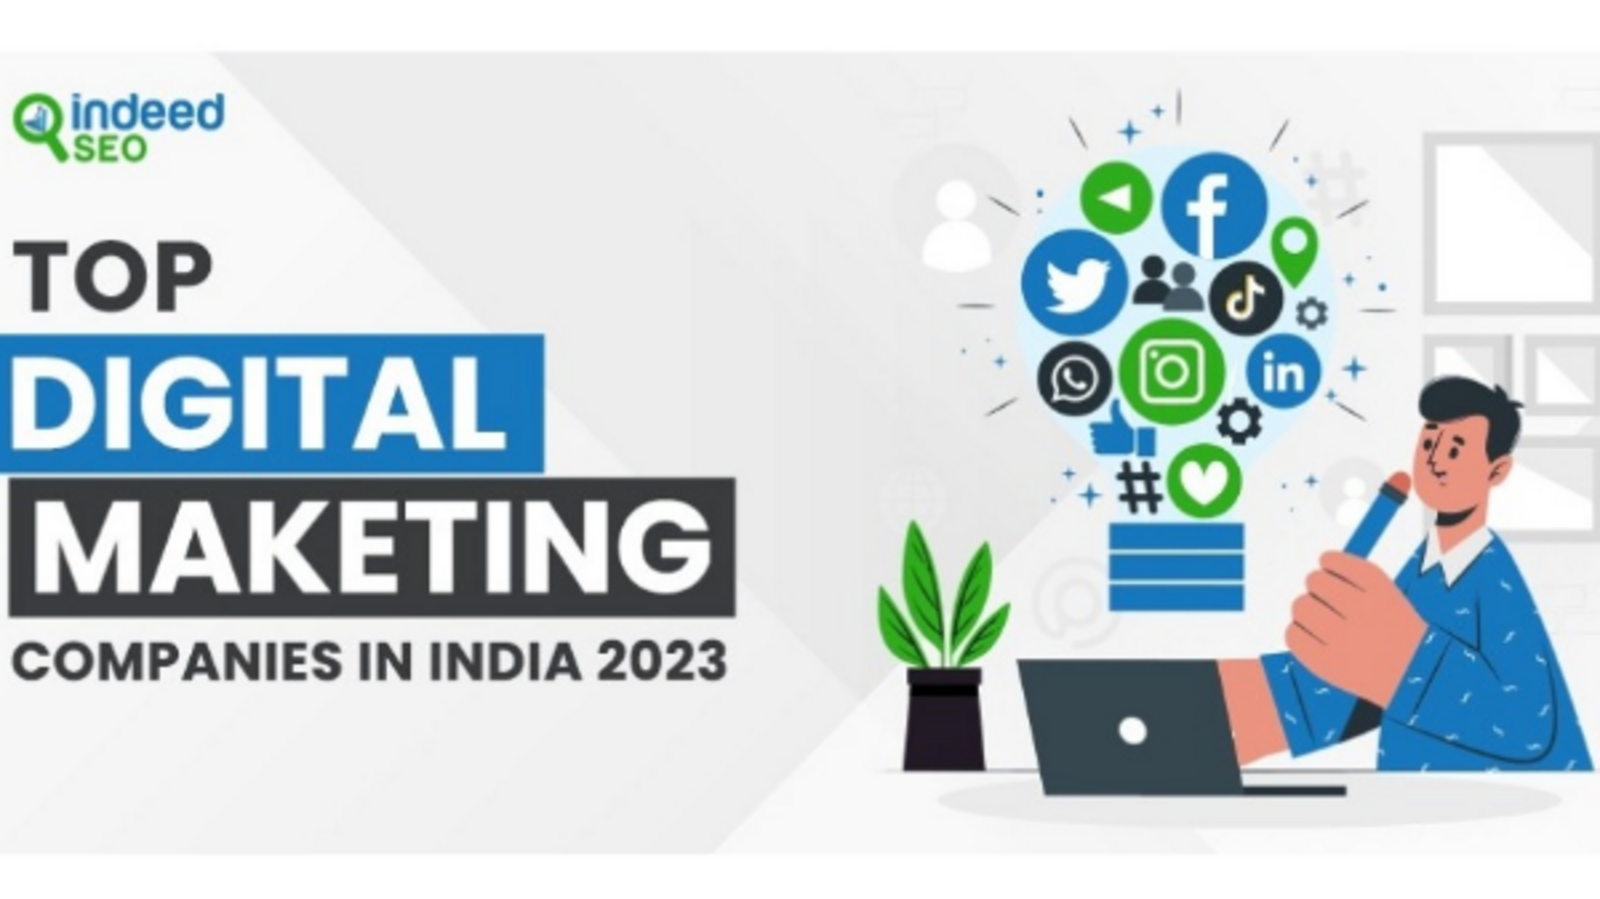 Top Digital Marketing Companies in India 2023 » Blog About Content